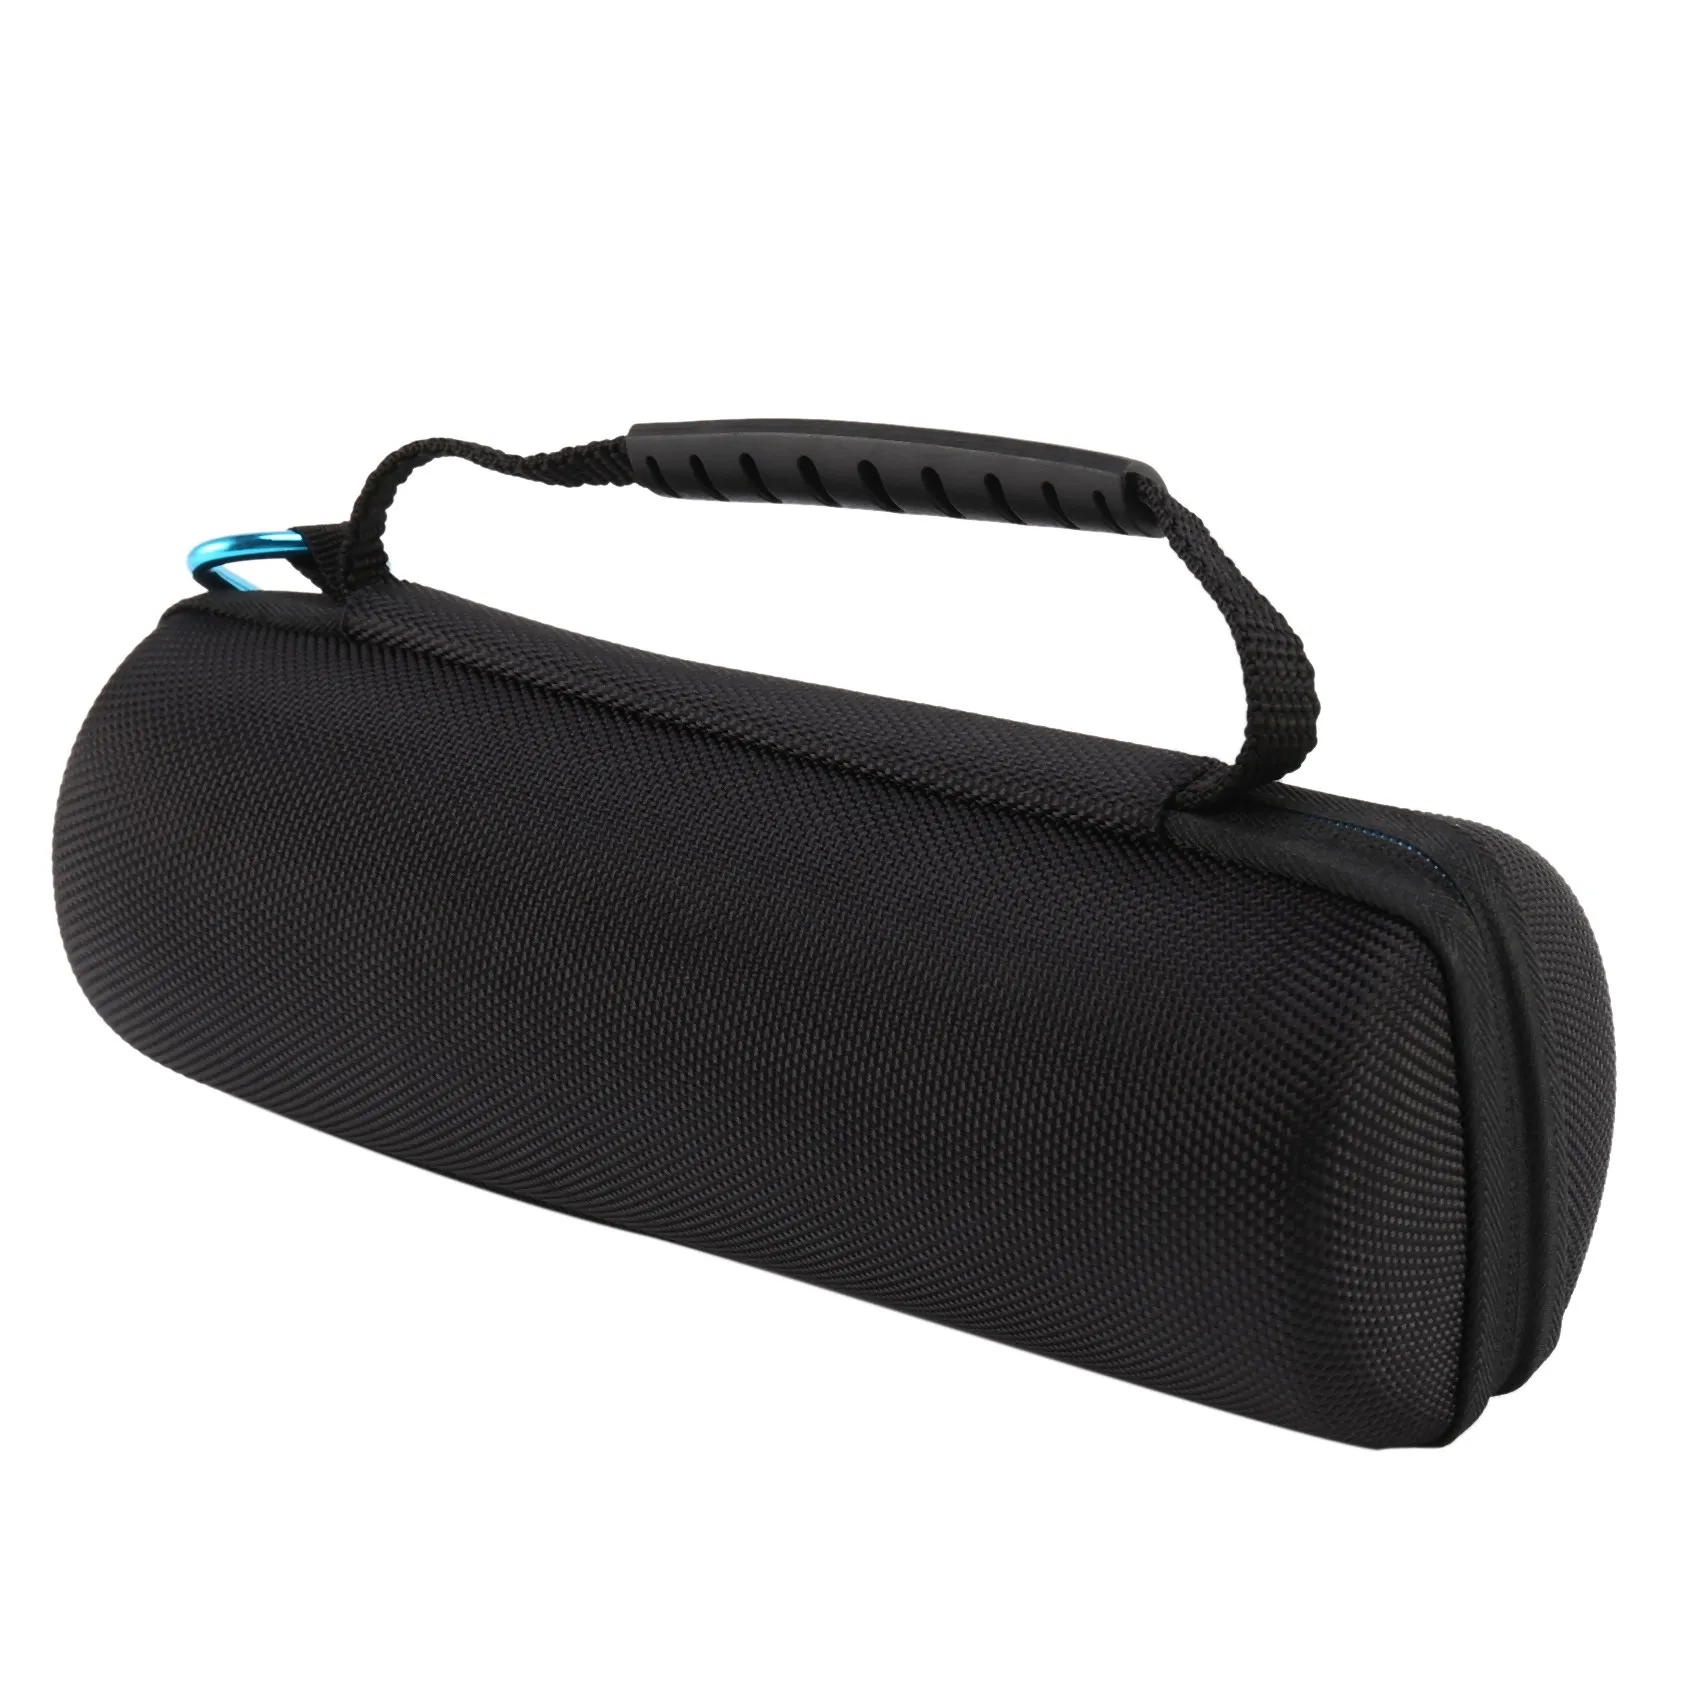 Hard Case Travel Carrying Storage Bag for JBL Flip 4 / 3 Wireless Bluetooth Portable Speaker. Fits USB Cable and Wall | Электроника - Фото №1